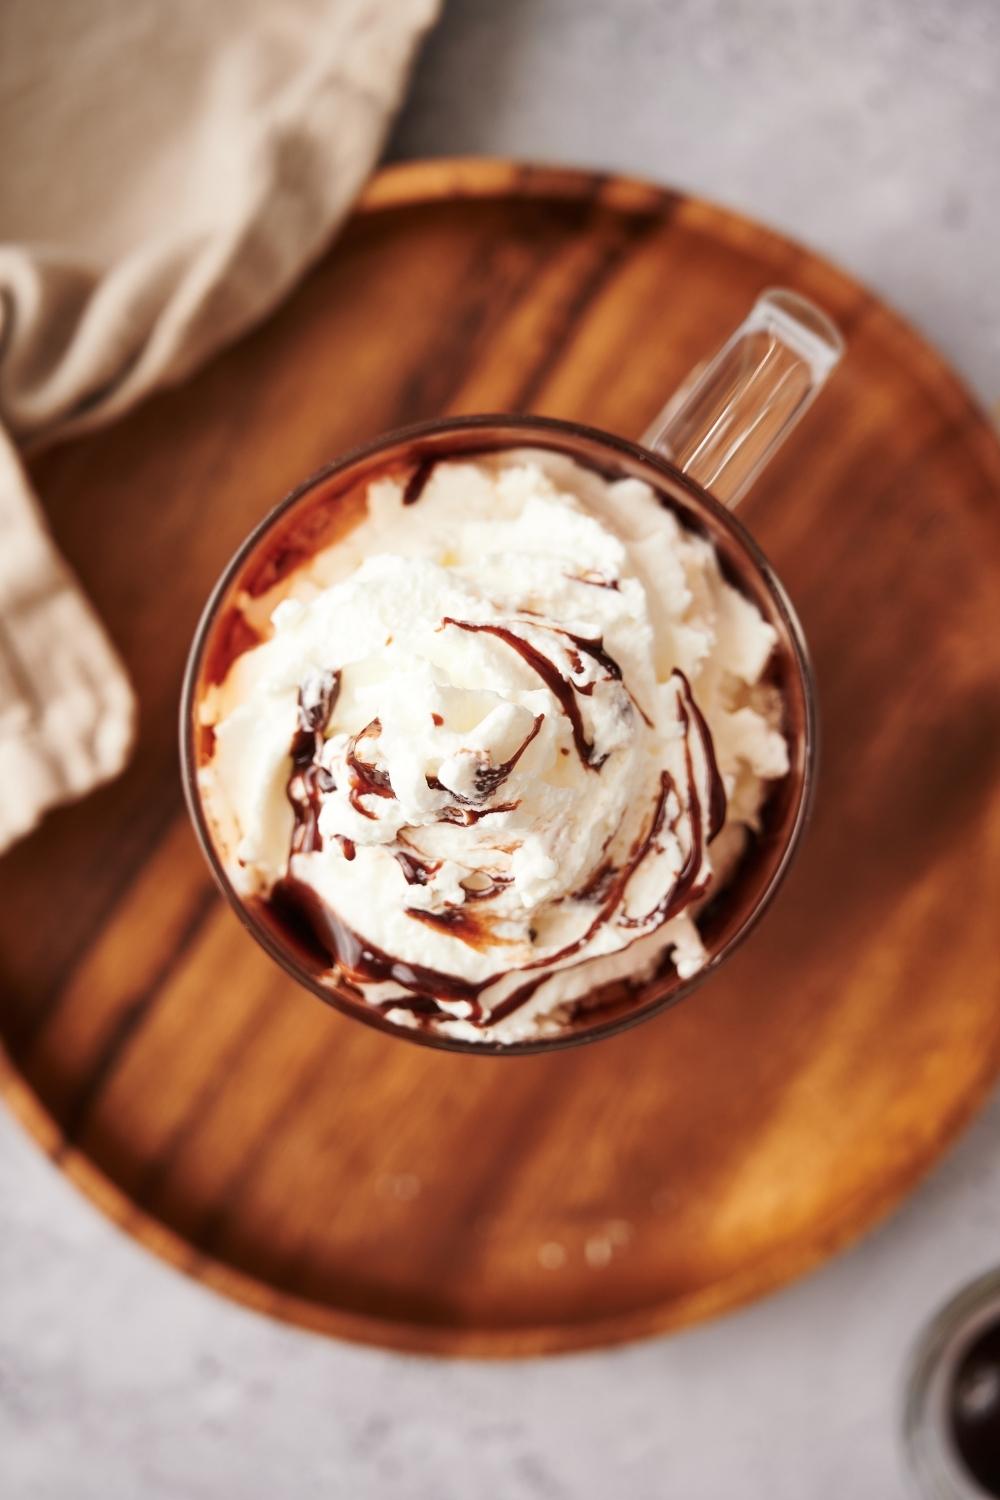 Whipped cream with chocolate sauce drizzled on top in a glass mug on a wooden plate.